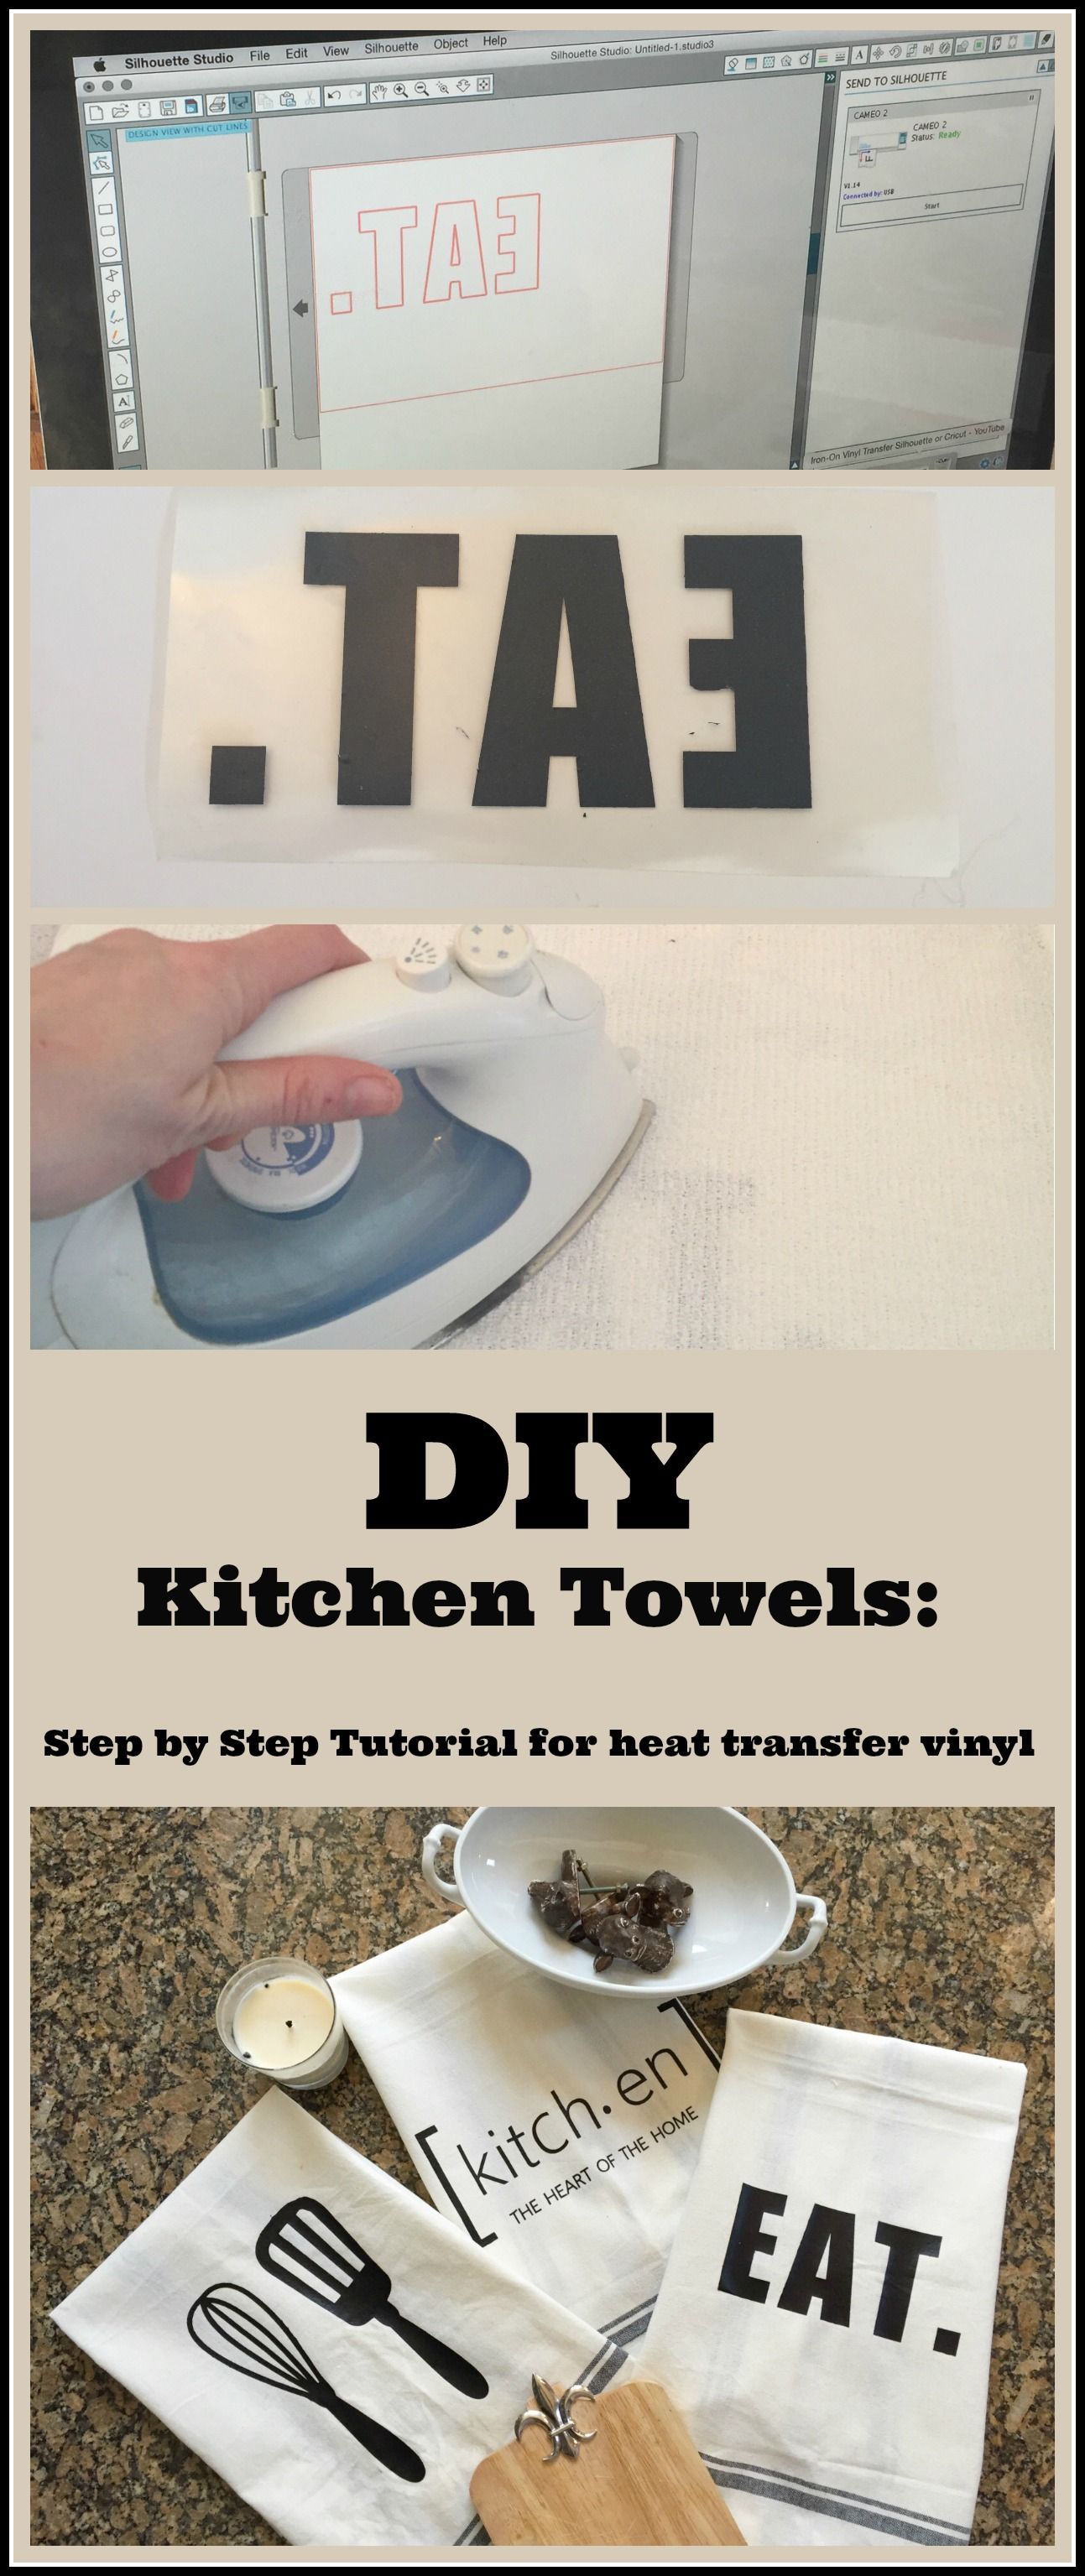 DIY Custom Kitchen Towels Using a Heat Transfer Image | My Life From Home | www.mylifefromhome.com